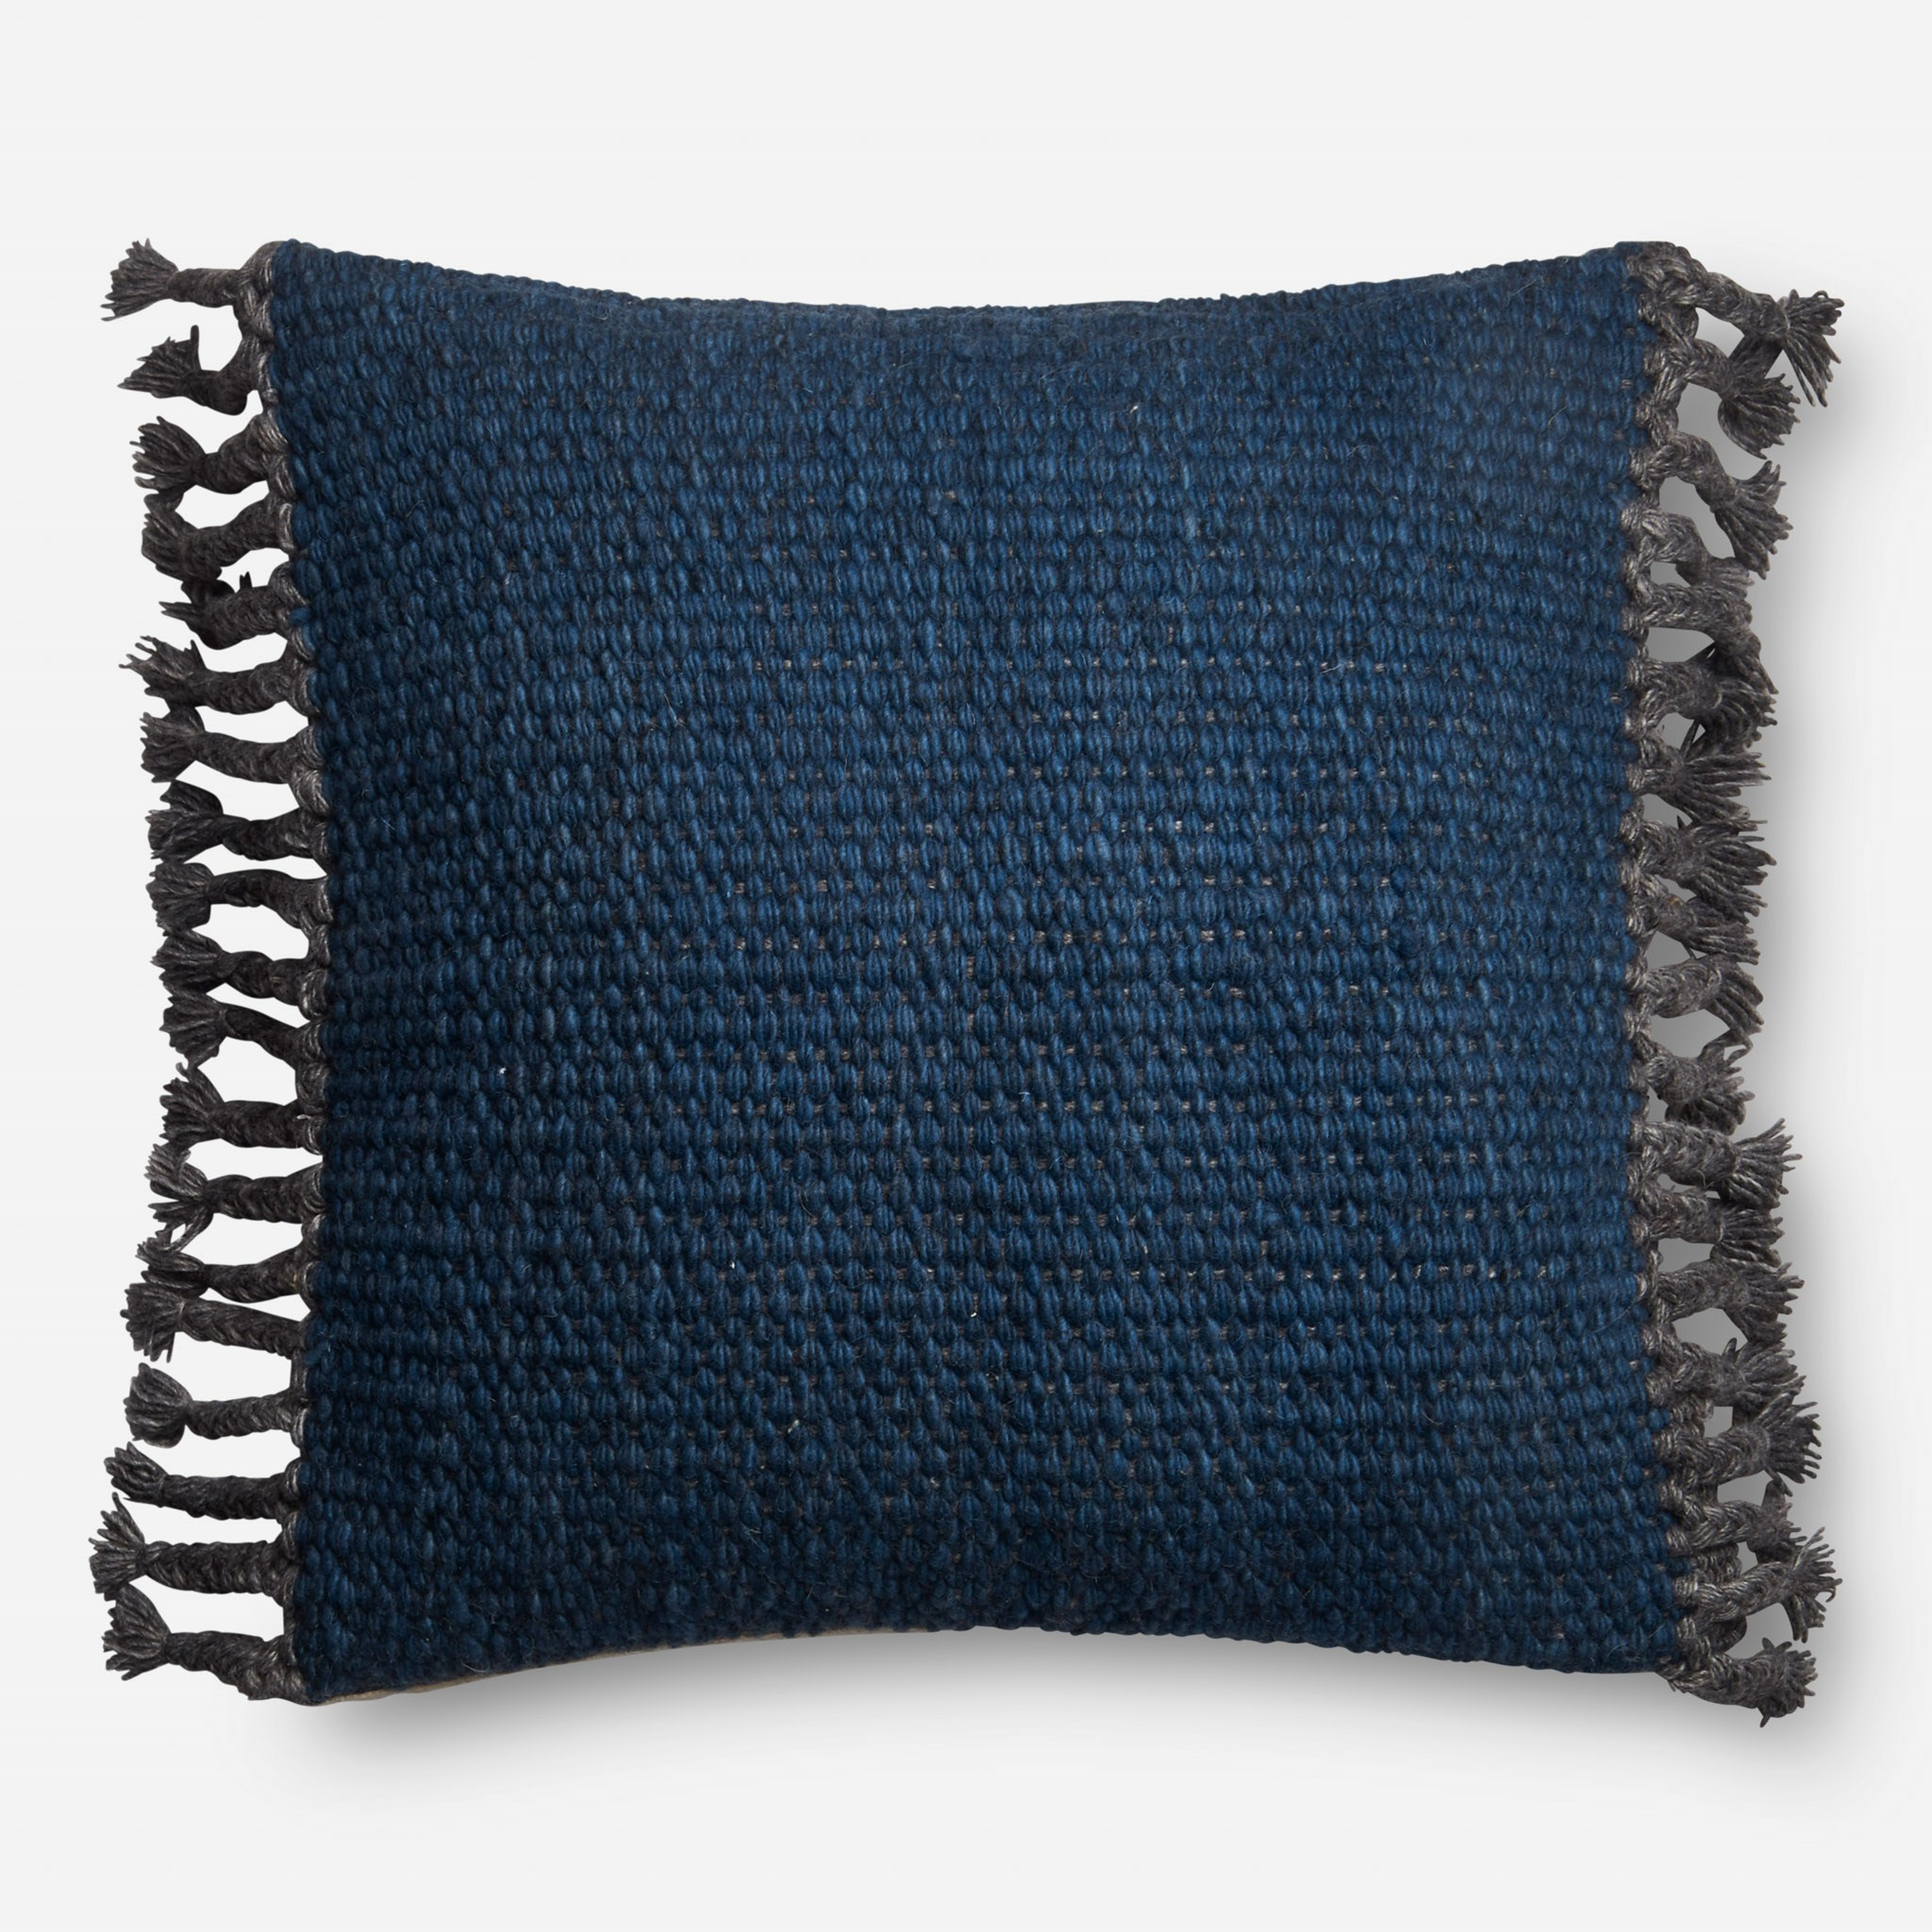 Tassel Throw Pillow with Down Fill, Navy, 22" x 22" - Loloi Rugs